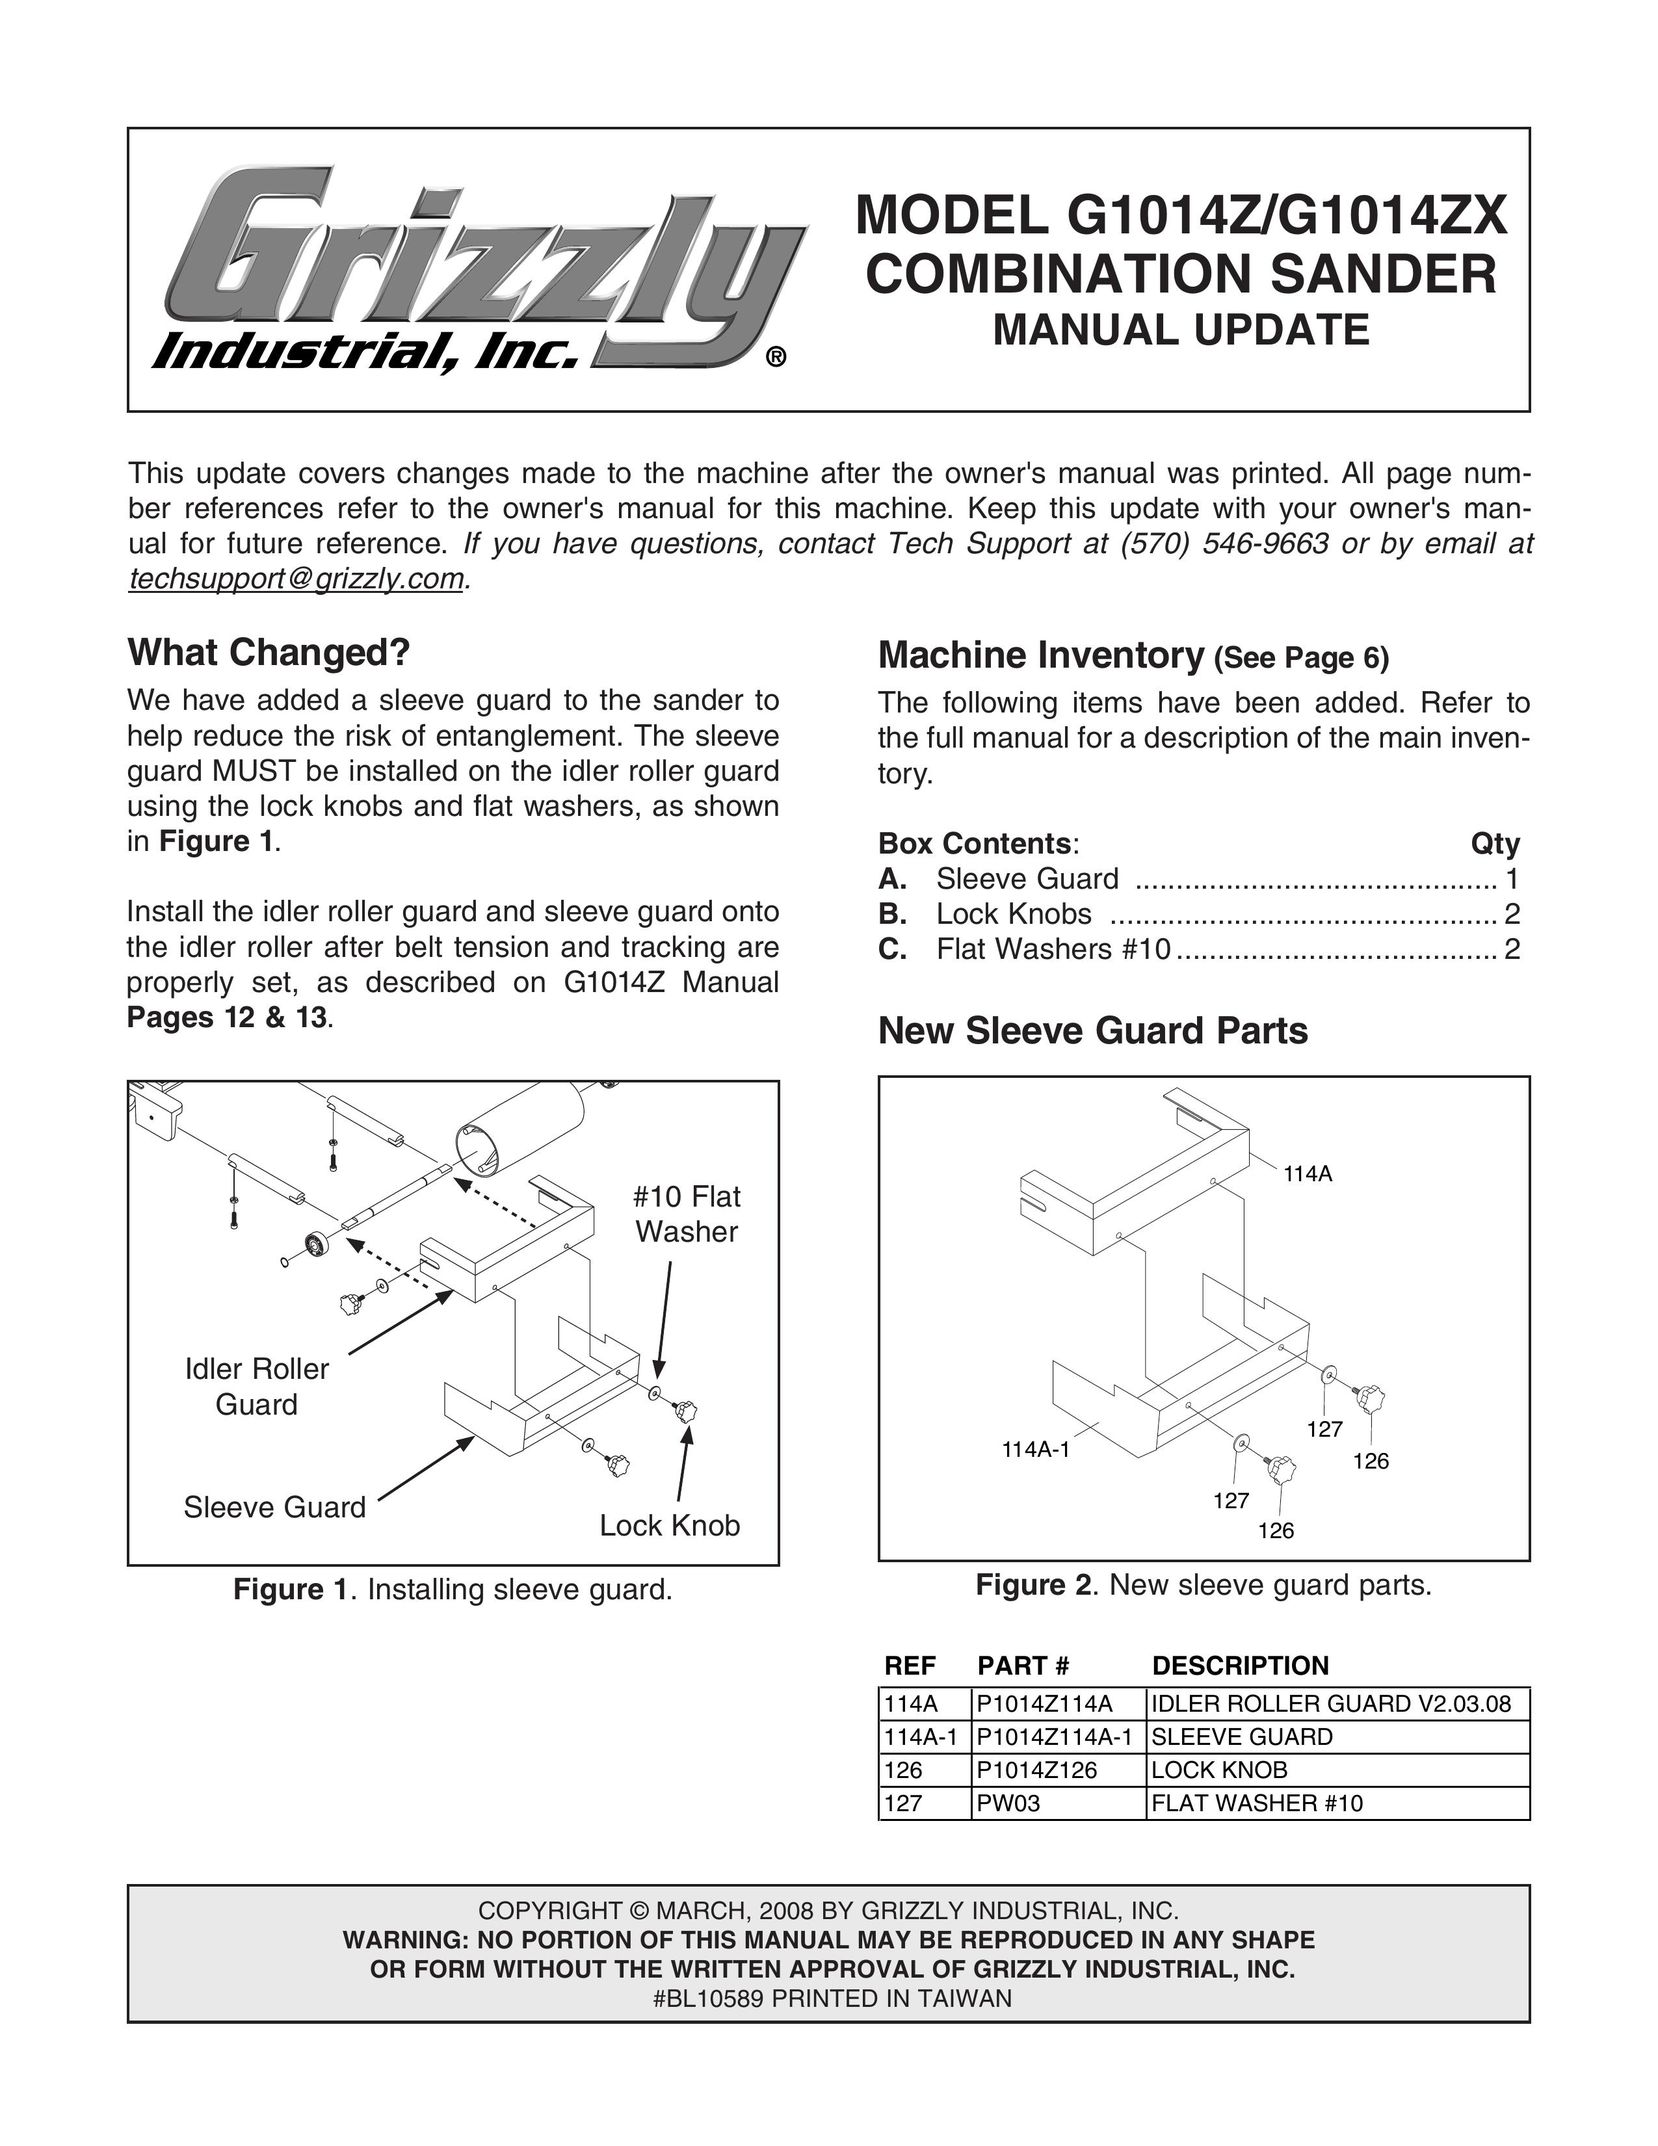 Grizzly G1014Z TV VCR Combo User Manual